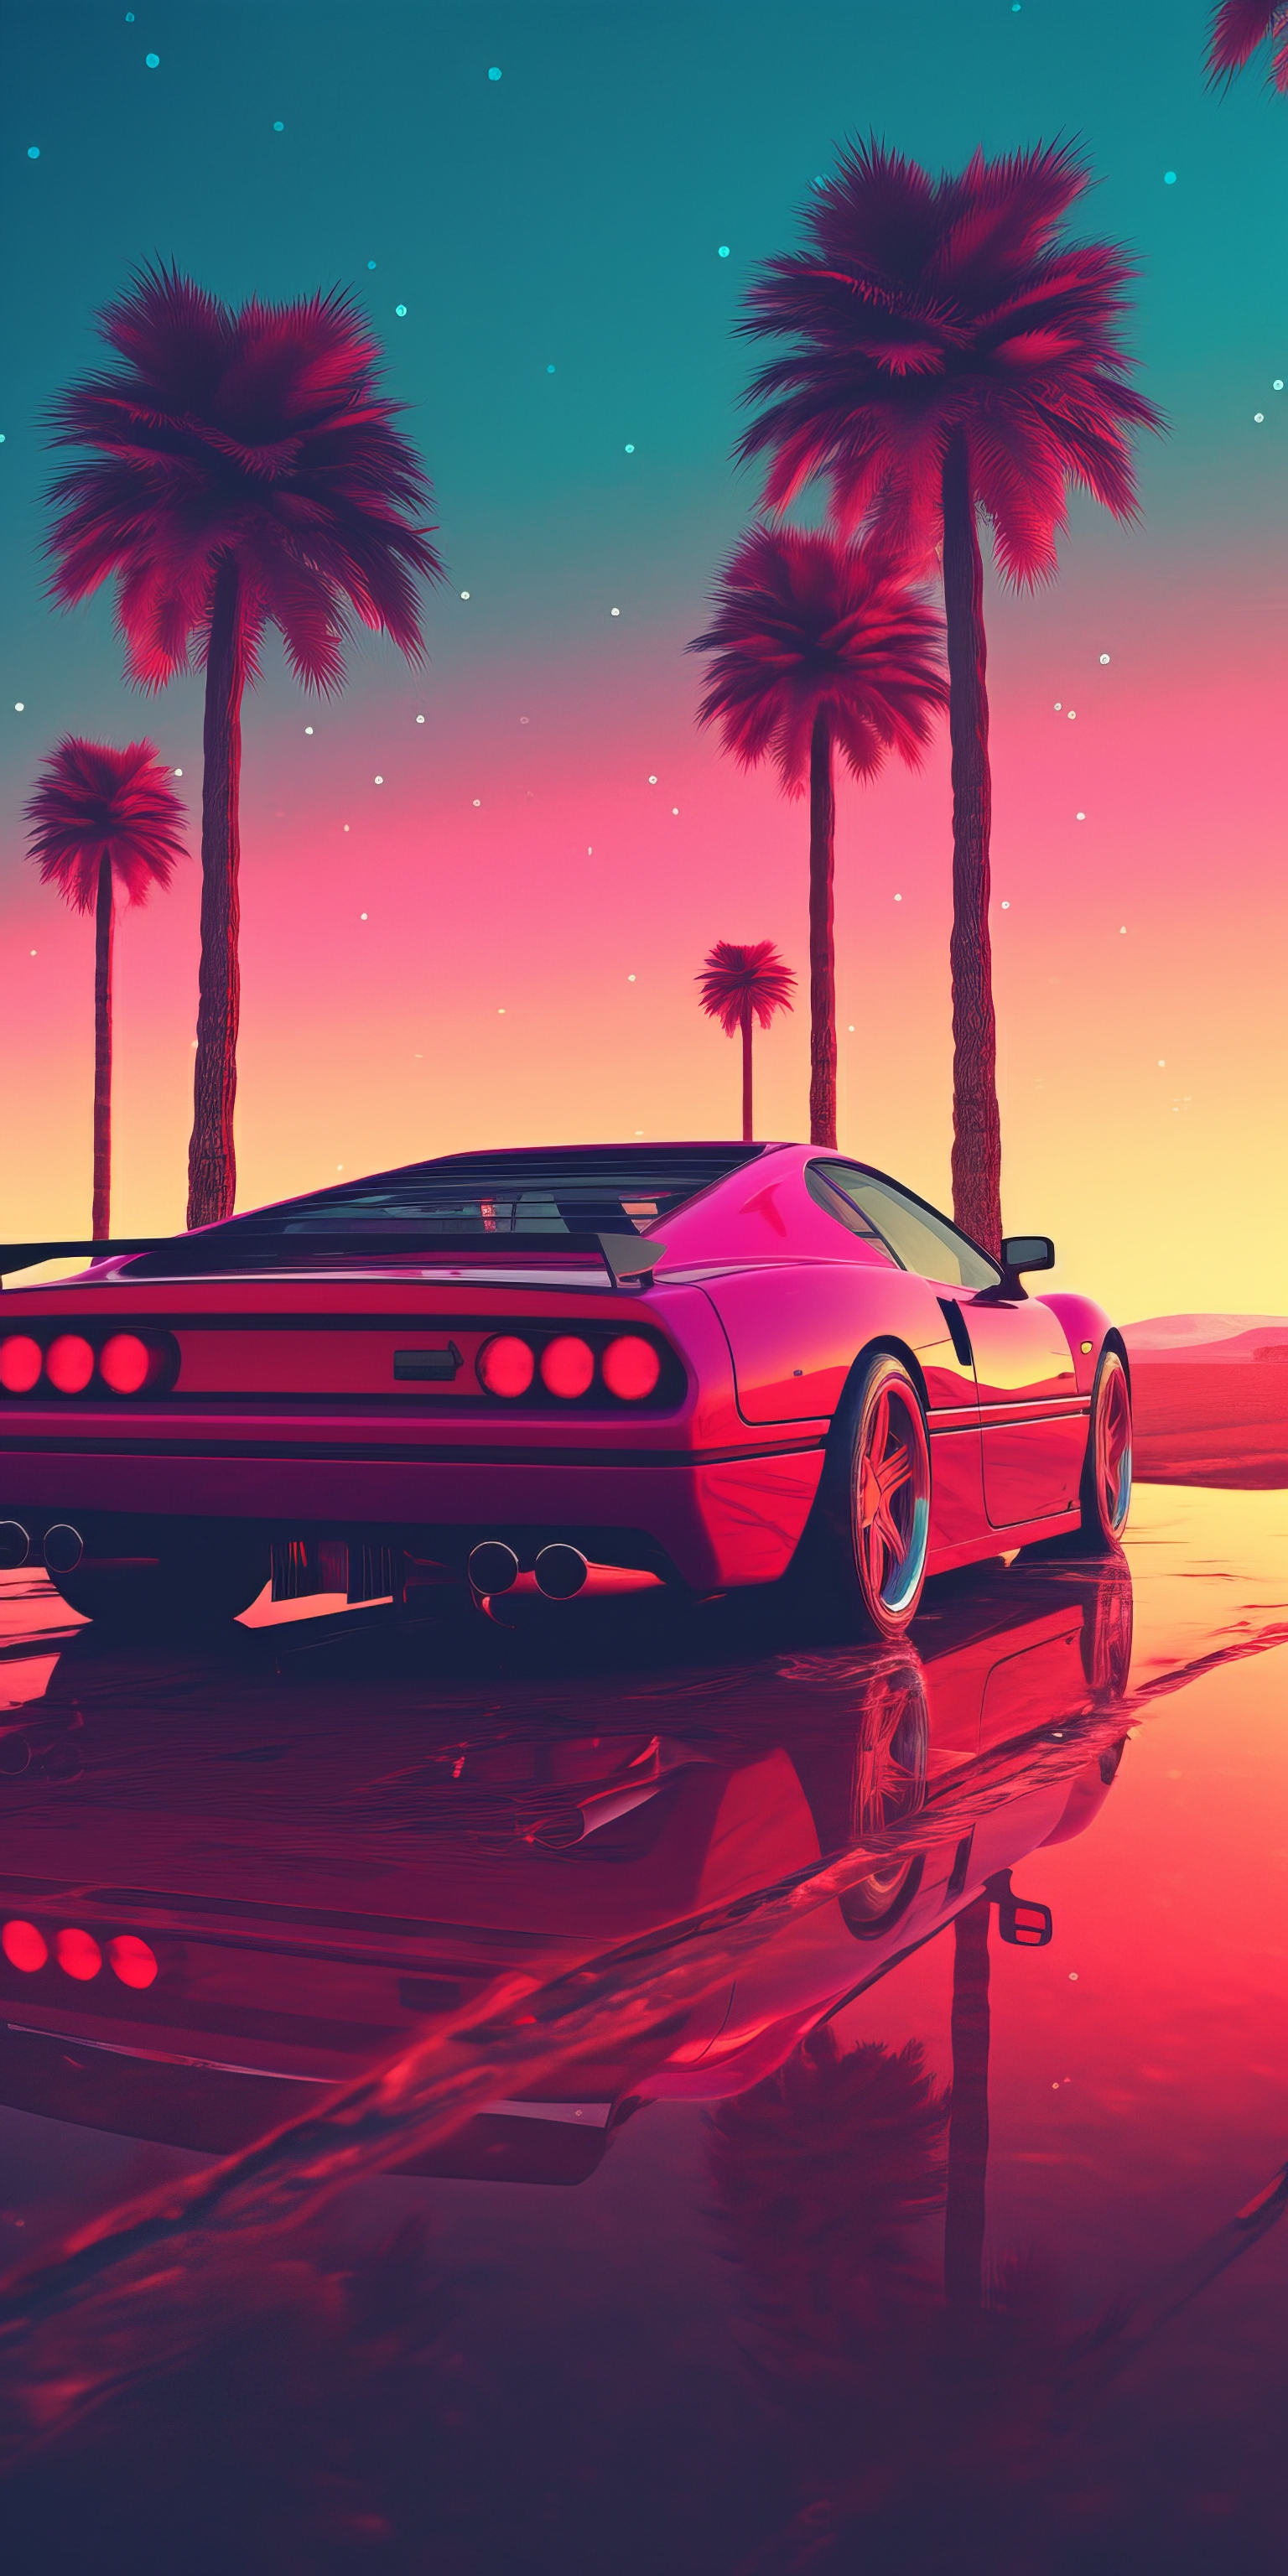 General 1536x3072 AI art portrait sports car sunset palm trees 1980s synthwave portrait display sunset glow car rear view licence plates sky stars reflection digital art